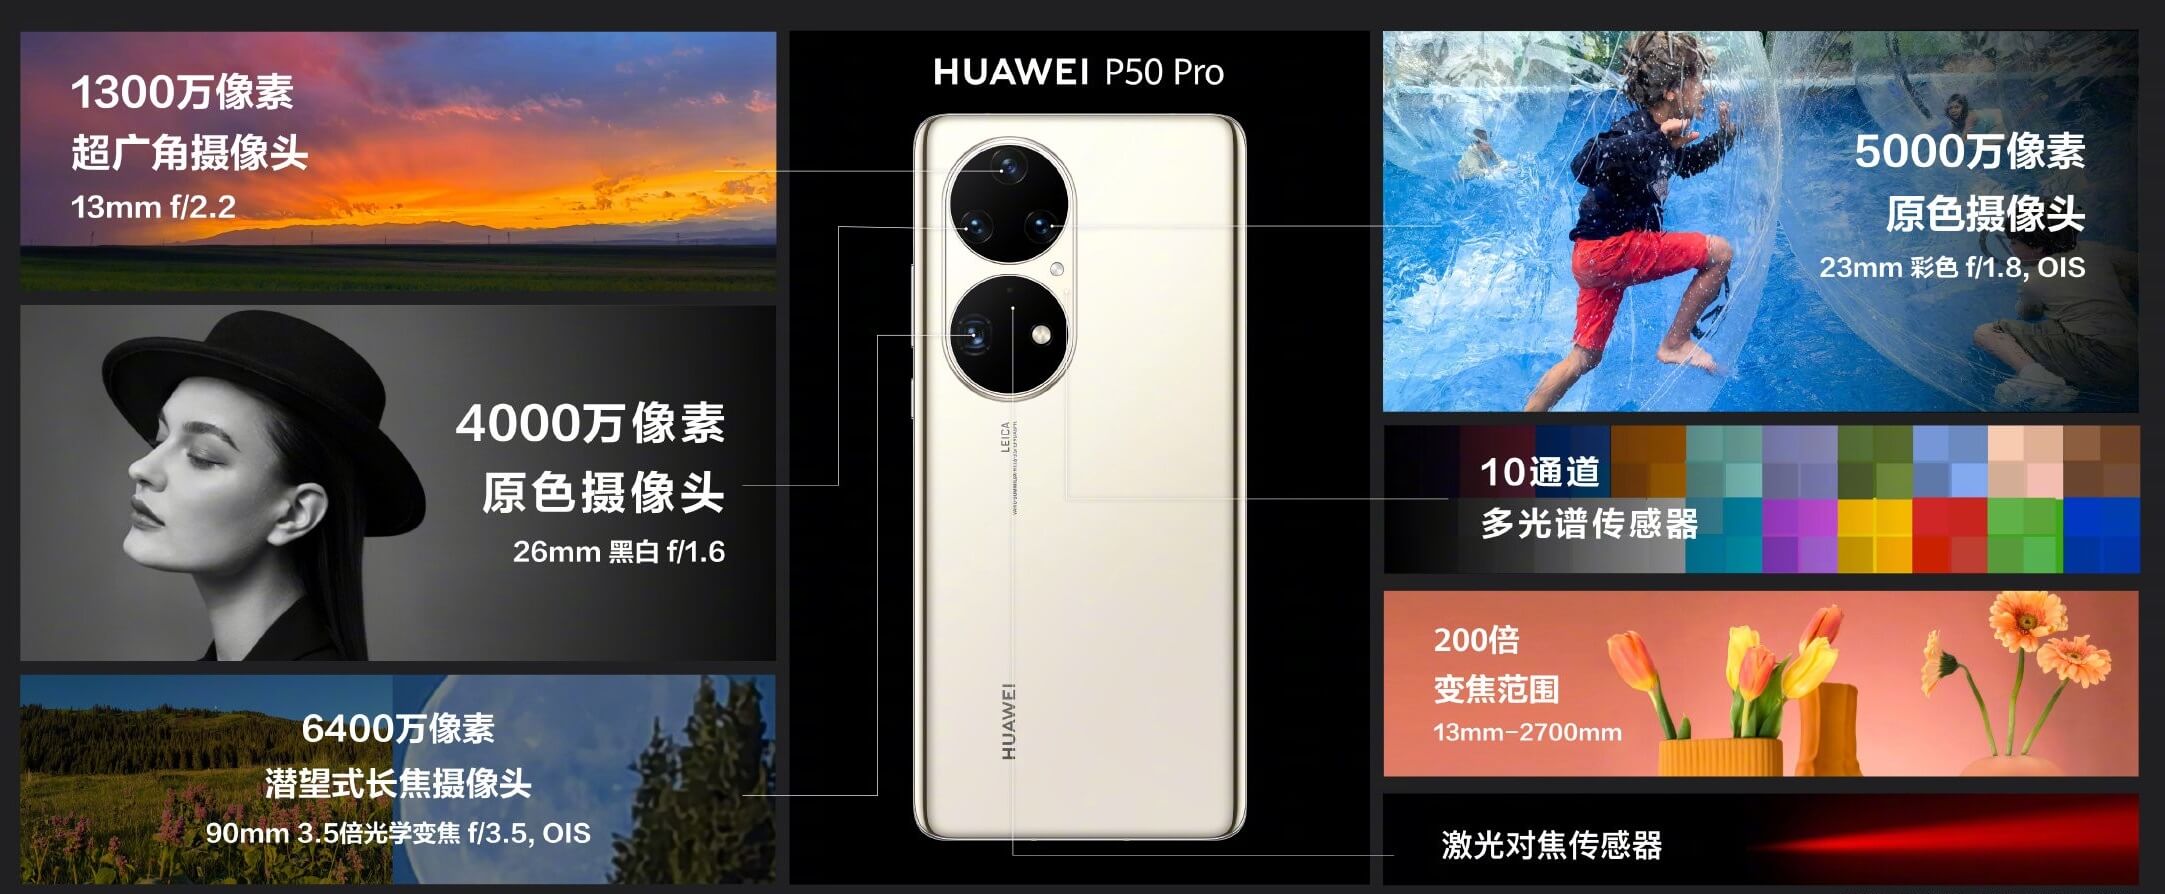 huawei P50 Pro camera features